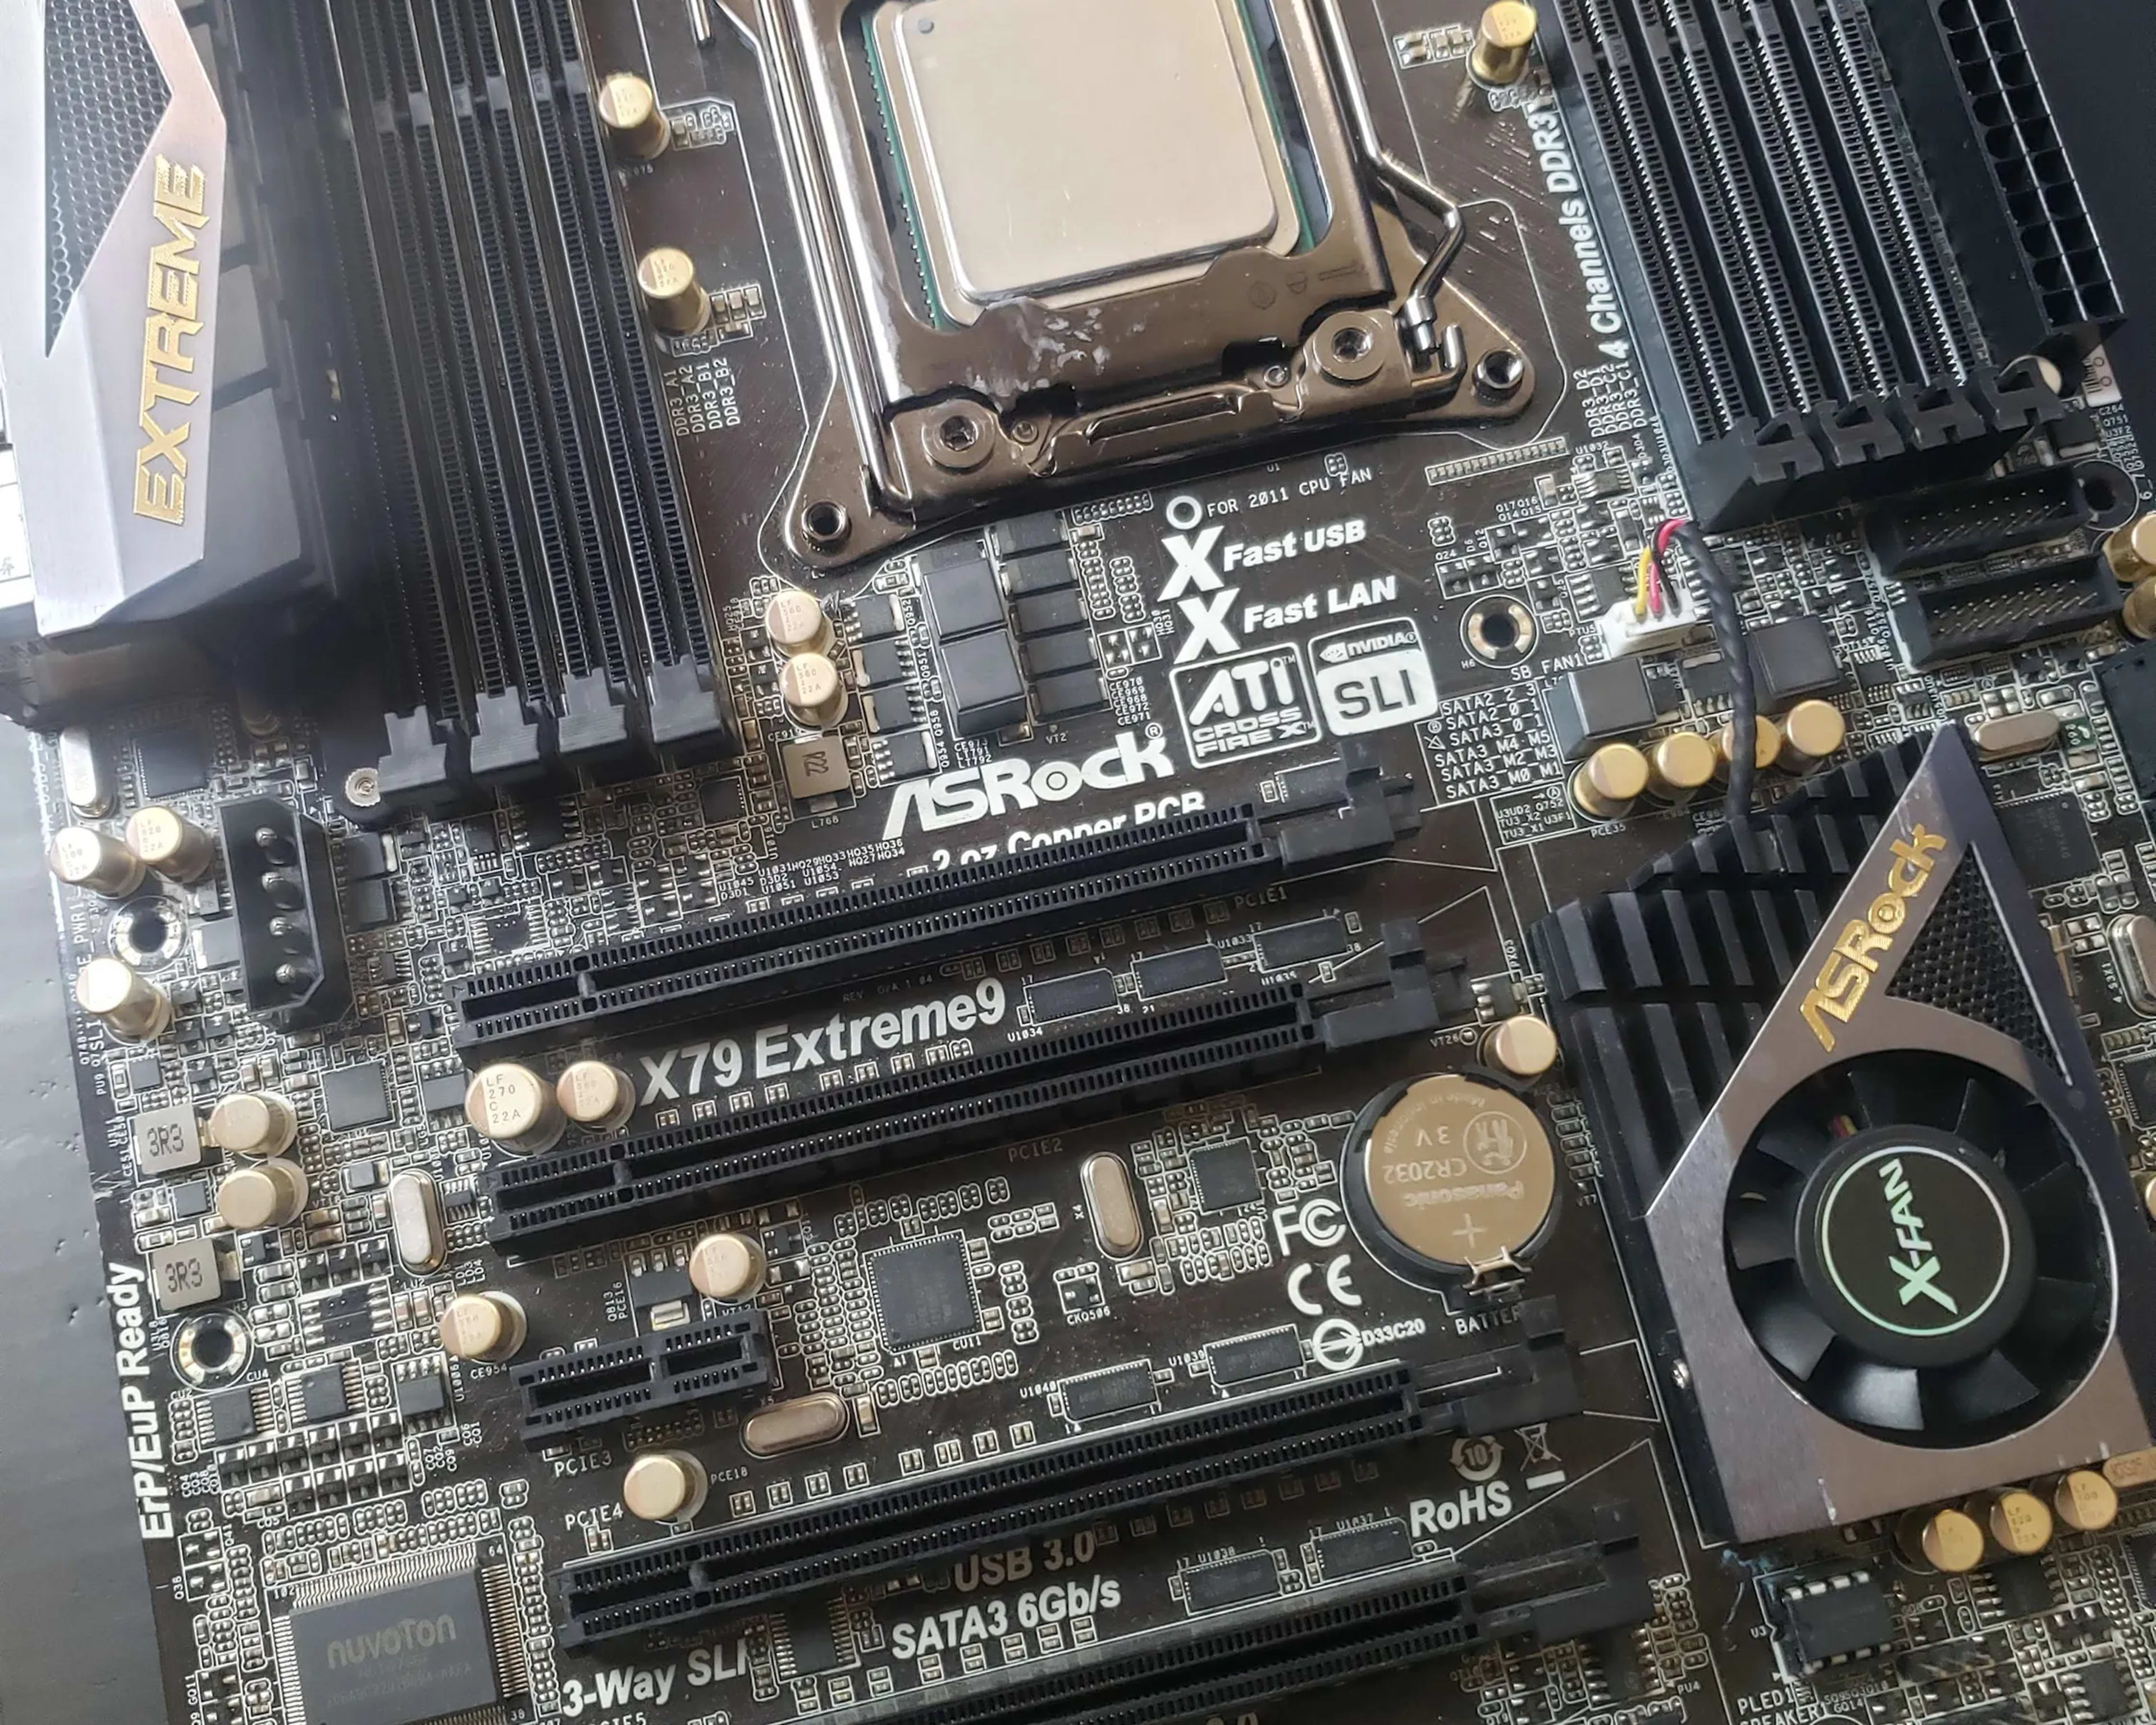 Asrock X79 Extreme9 Motherboard with E5-1620 CPU LGA2011 Socket with Original Box/Accessories